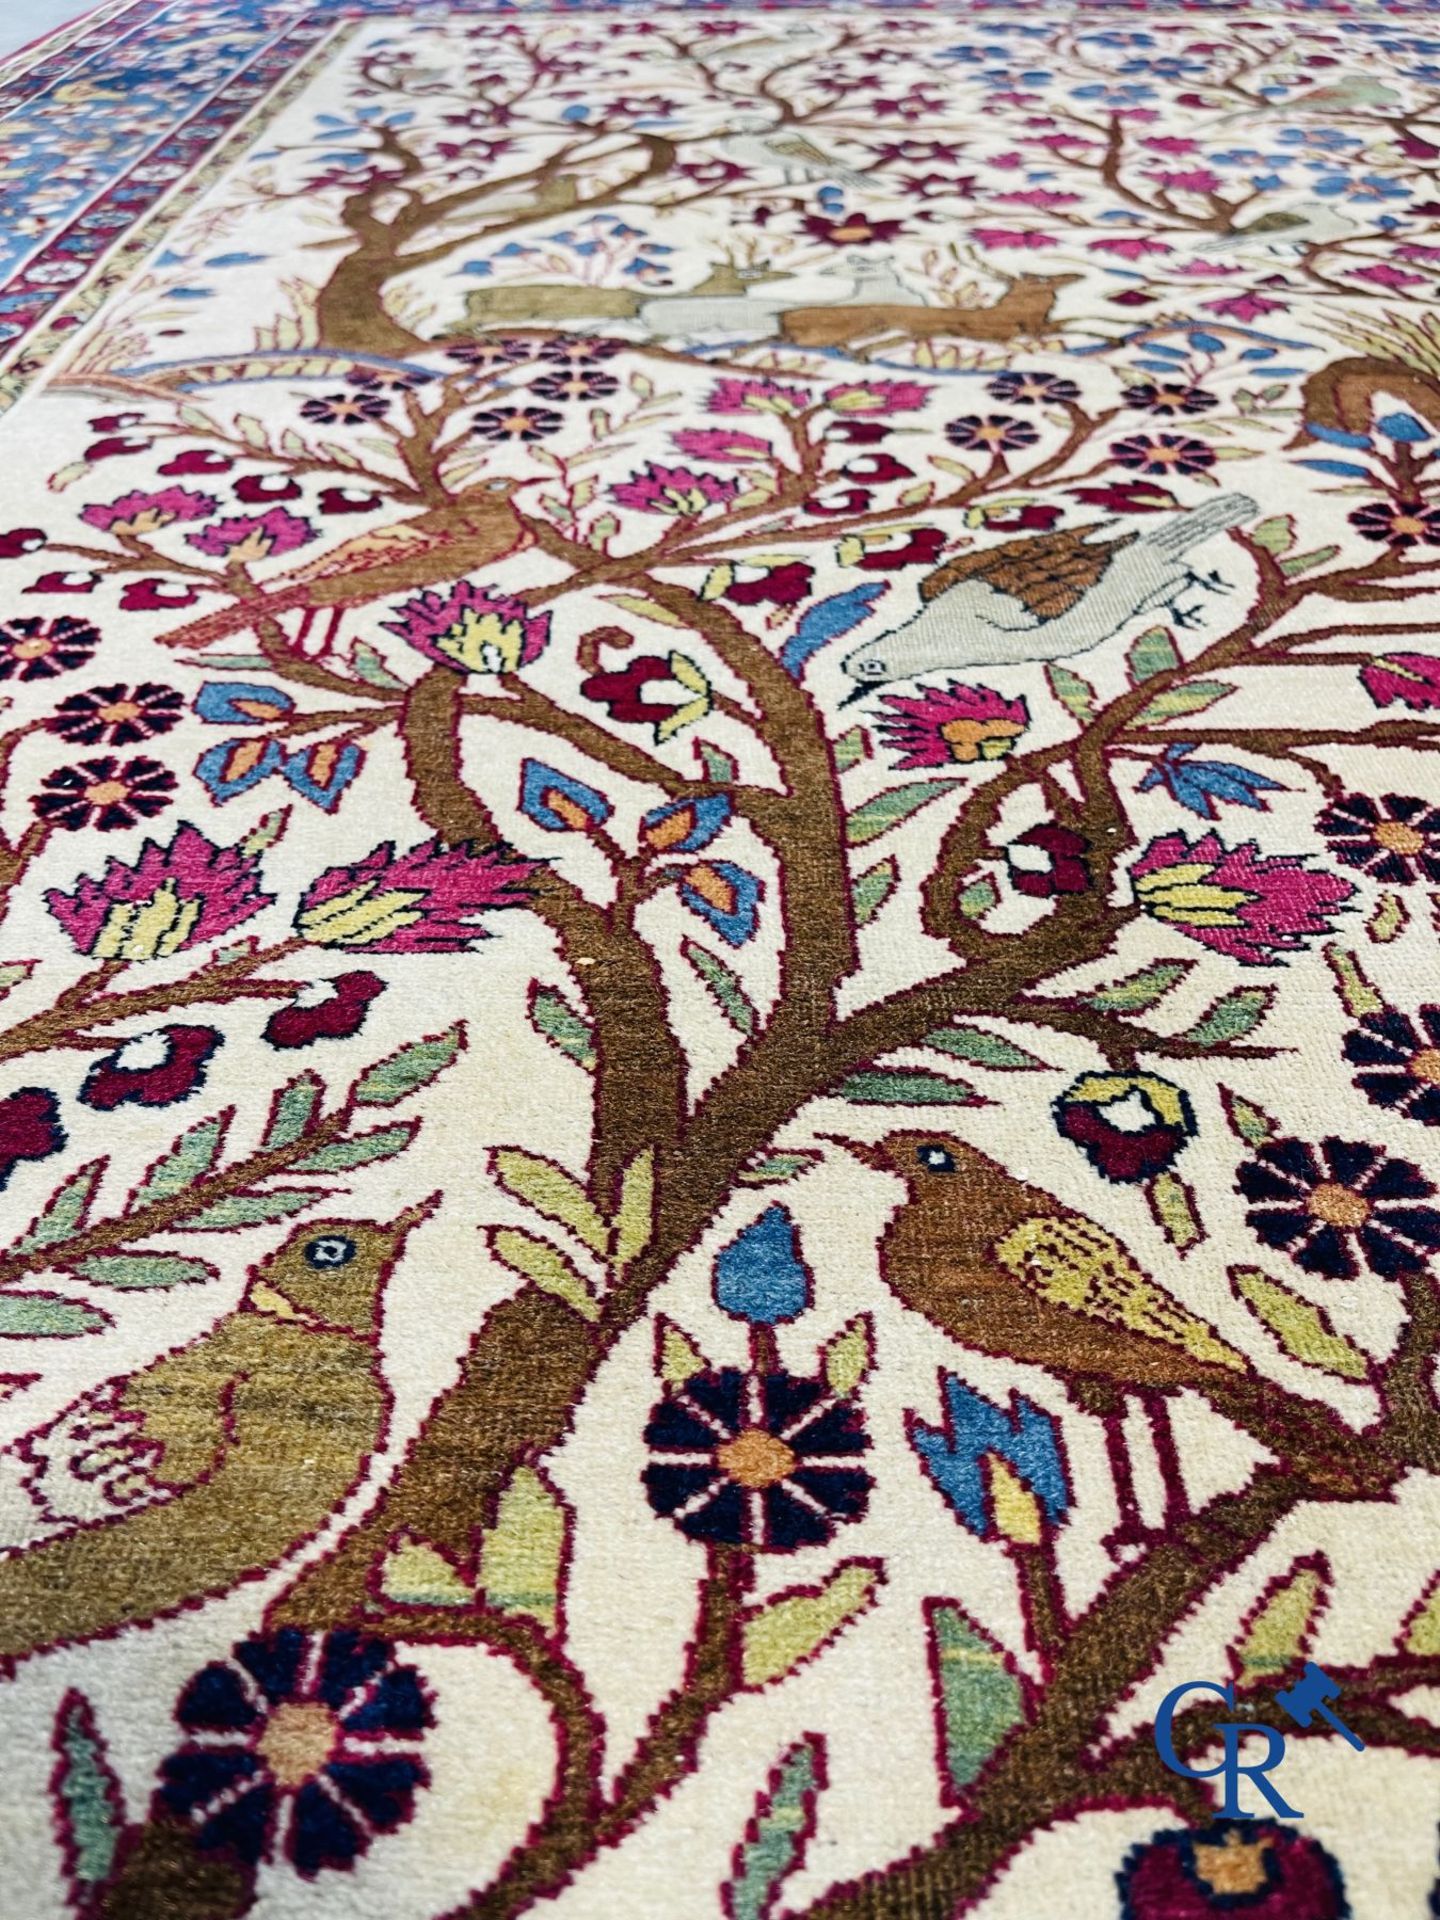 Oriental carpets: Antique oriental carpet with a decor of animals and birds in the forest. - Image 7 of 10